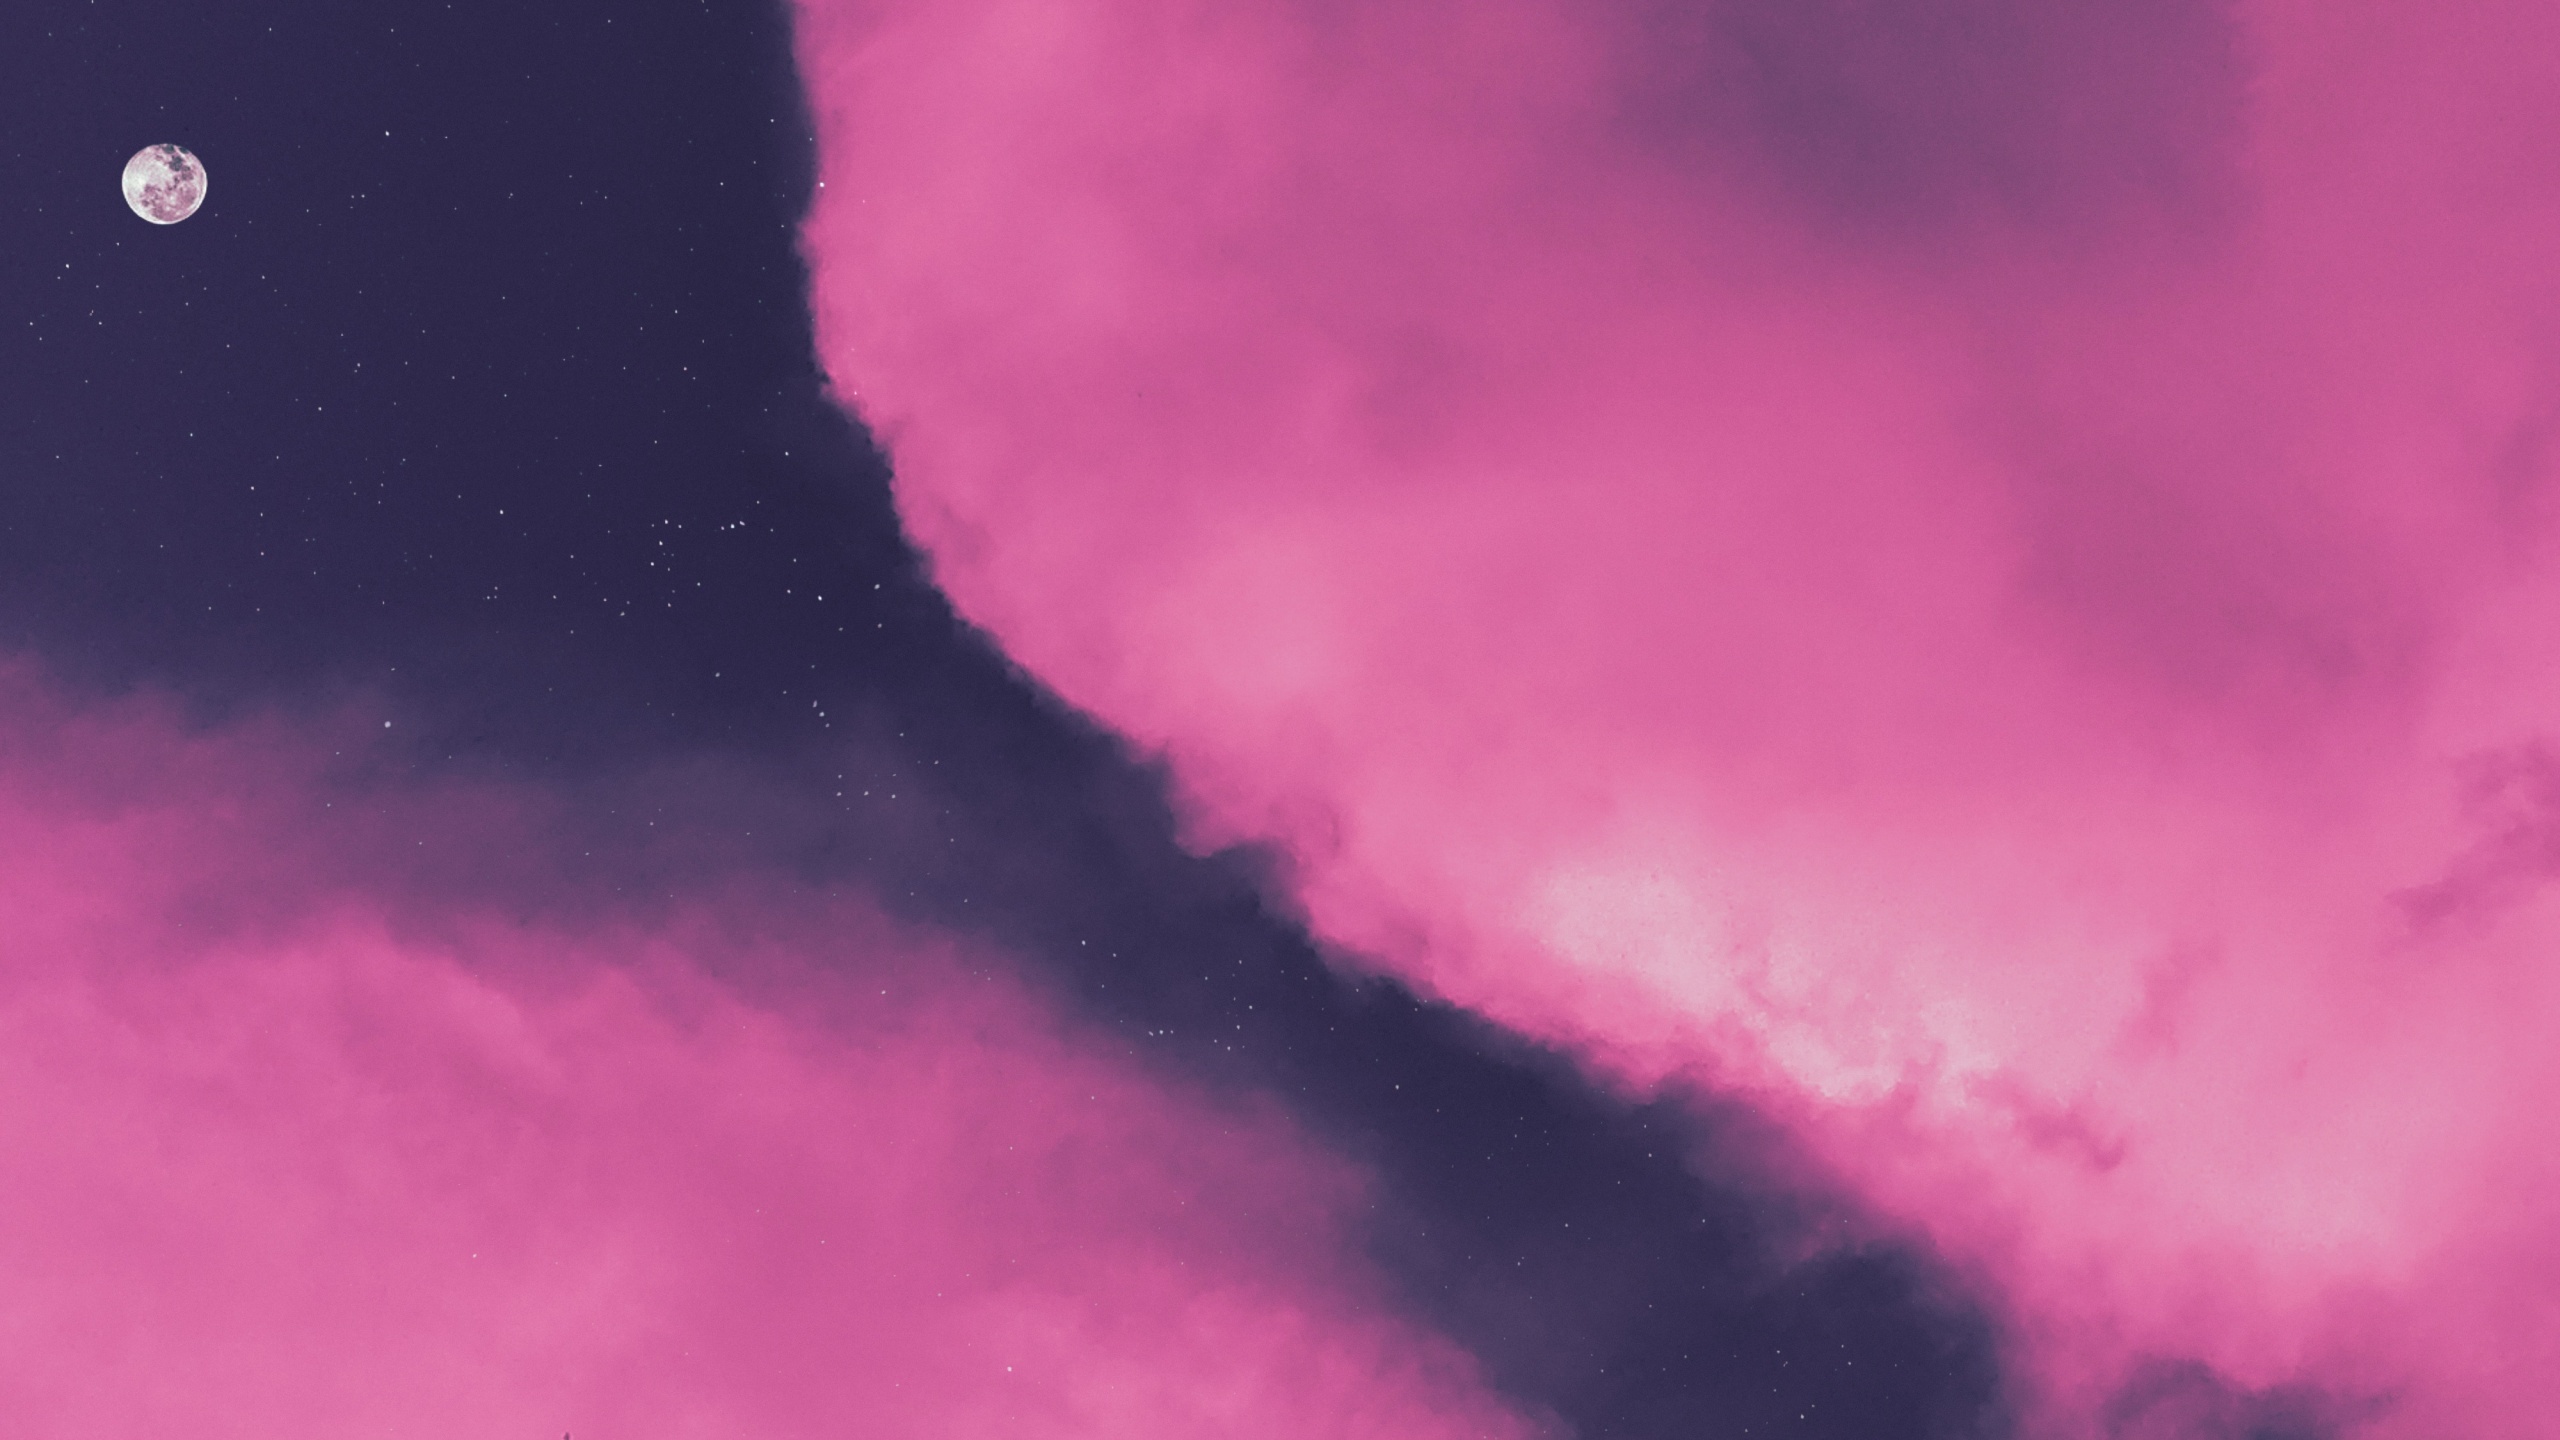 Top 999+ Aesthetic Pink Wallpaper Full HD, 4K✓Free to Use